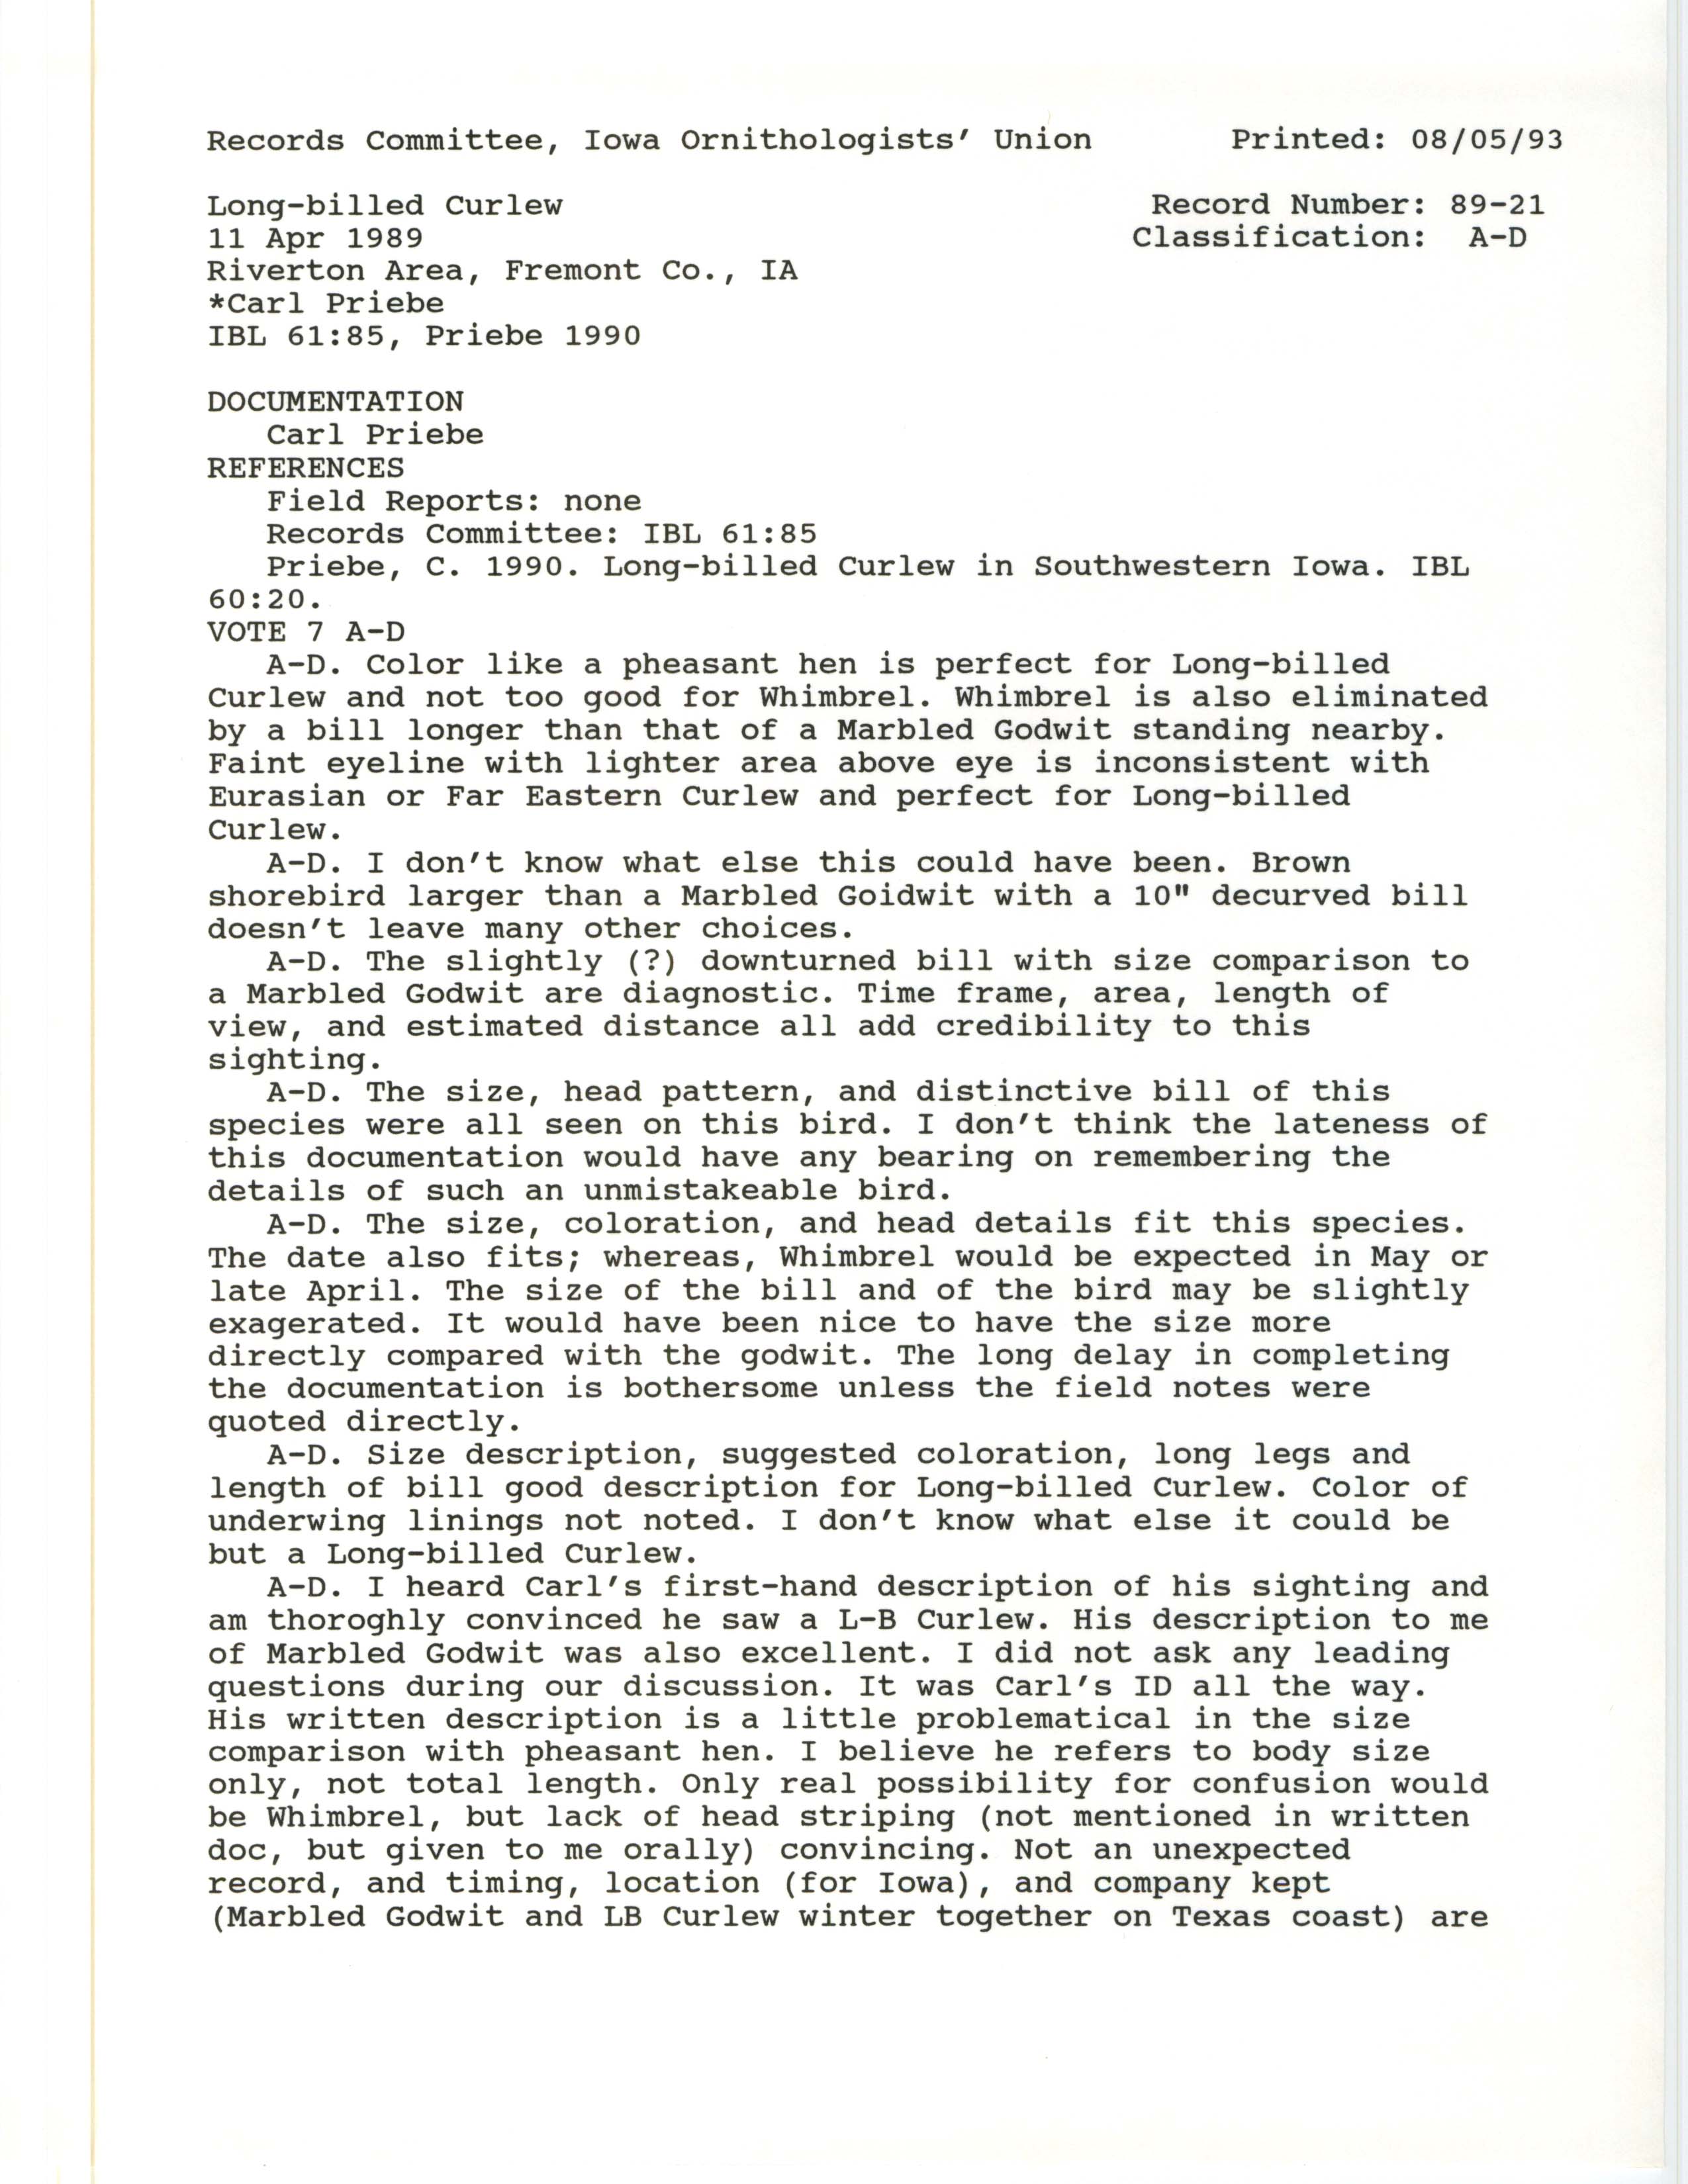 Records Committee review for rare bird sighting of Long-billed Curlew at Riverton Area, 1989